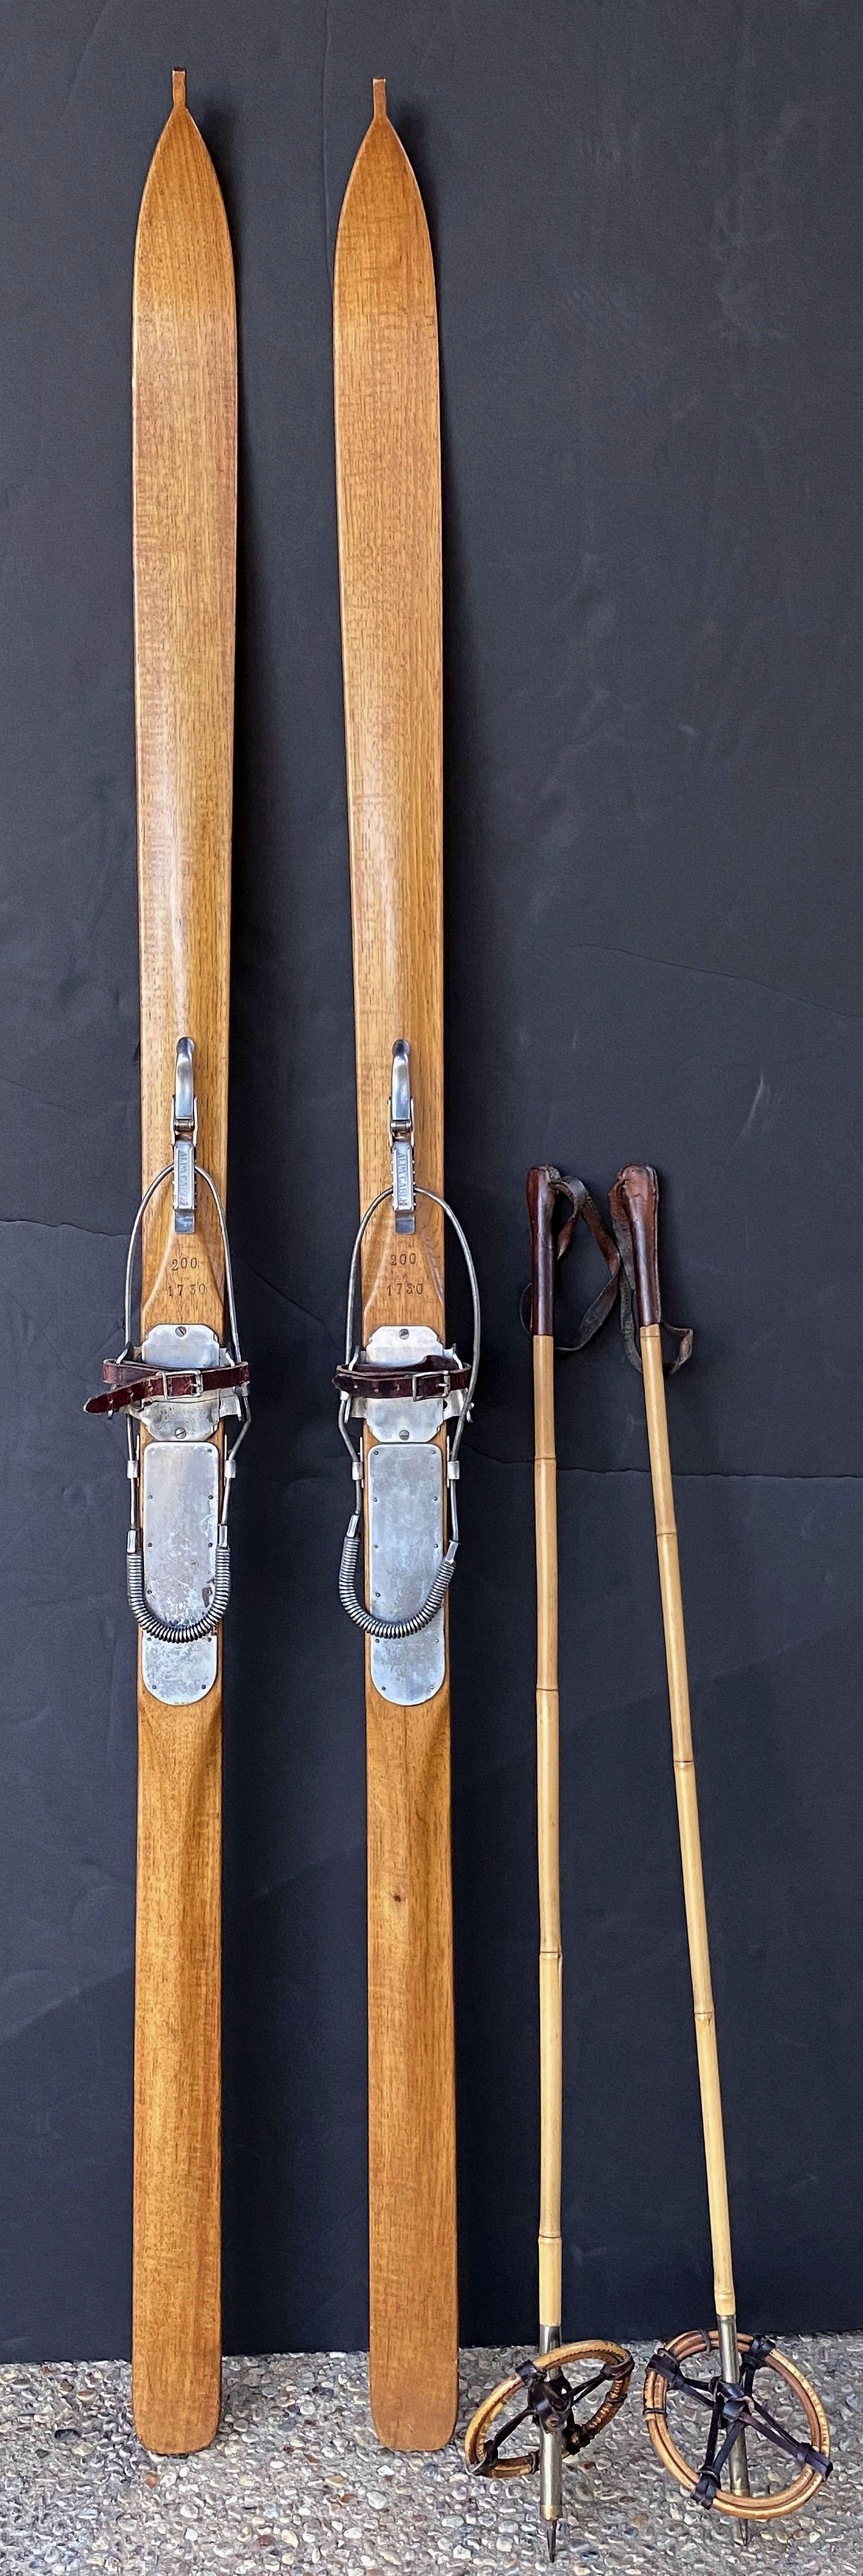 A fine pair of vintage French wooden skis with bamboo skiing poles of the style that were very popular from the mid-1930s to early 1950s.

Marked: Alpa Cable.

Great for a ski lodge or chalet!